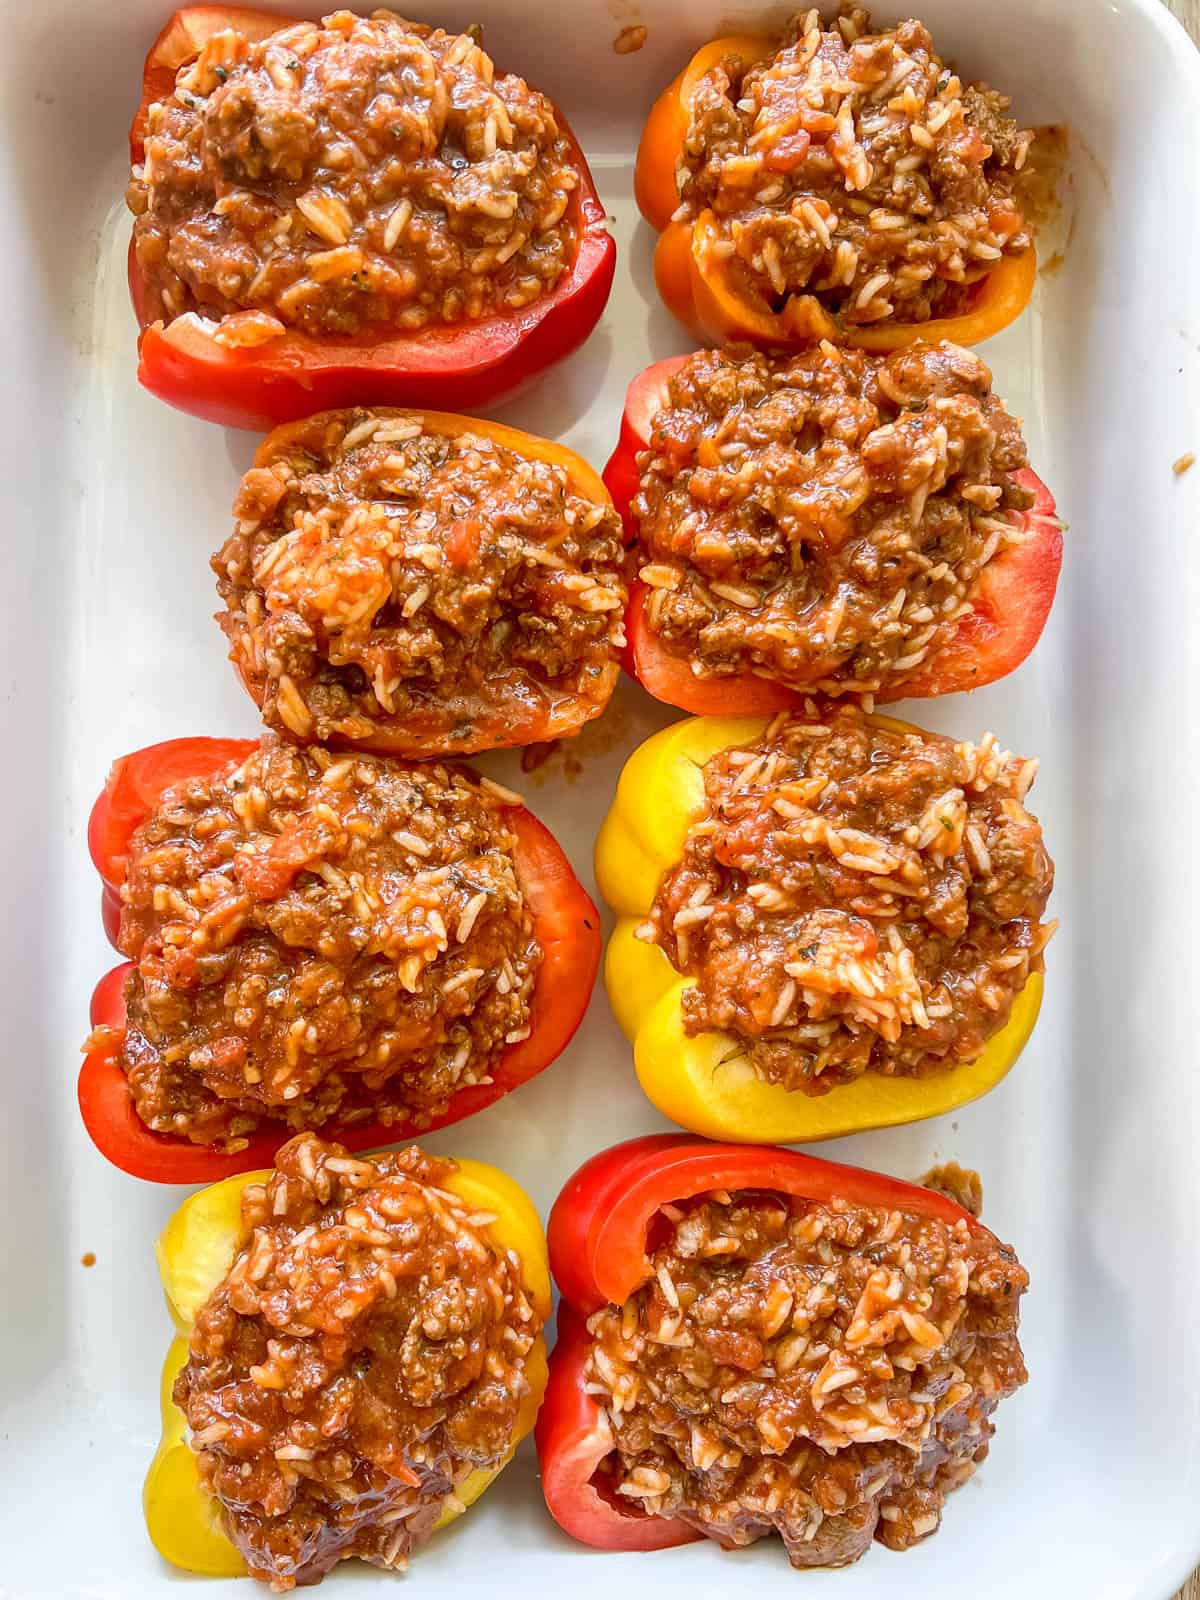 Peppers stuffed with meat and rice sauce.